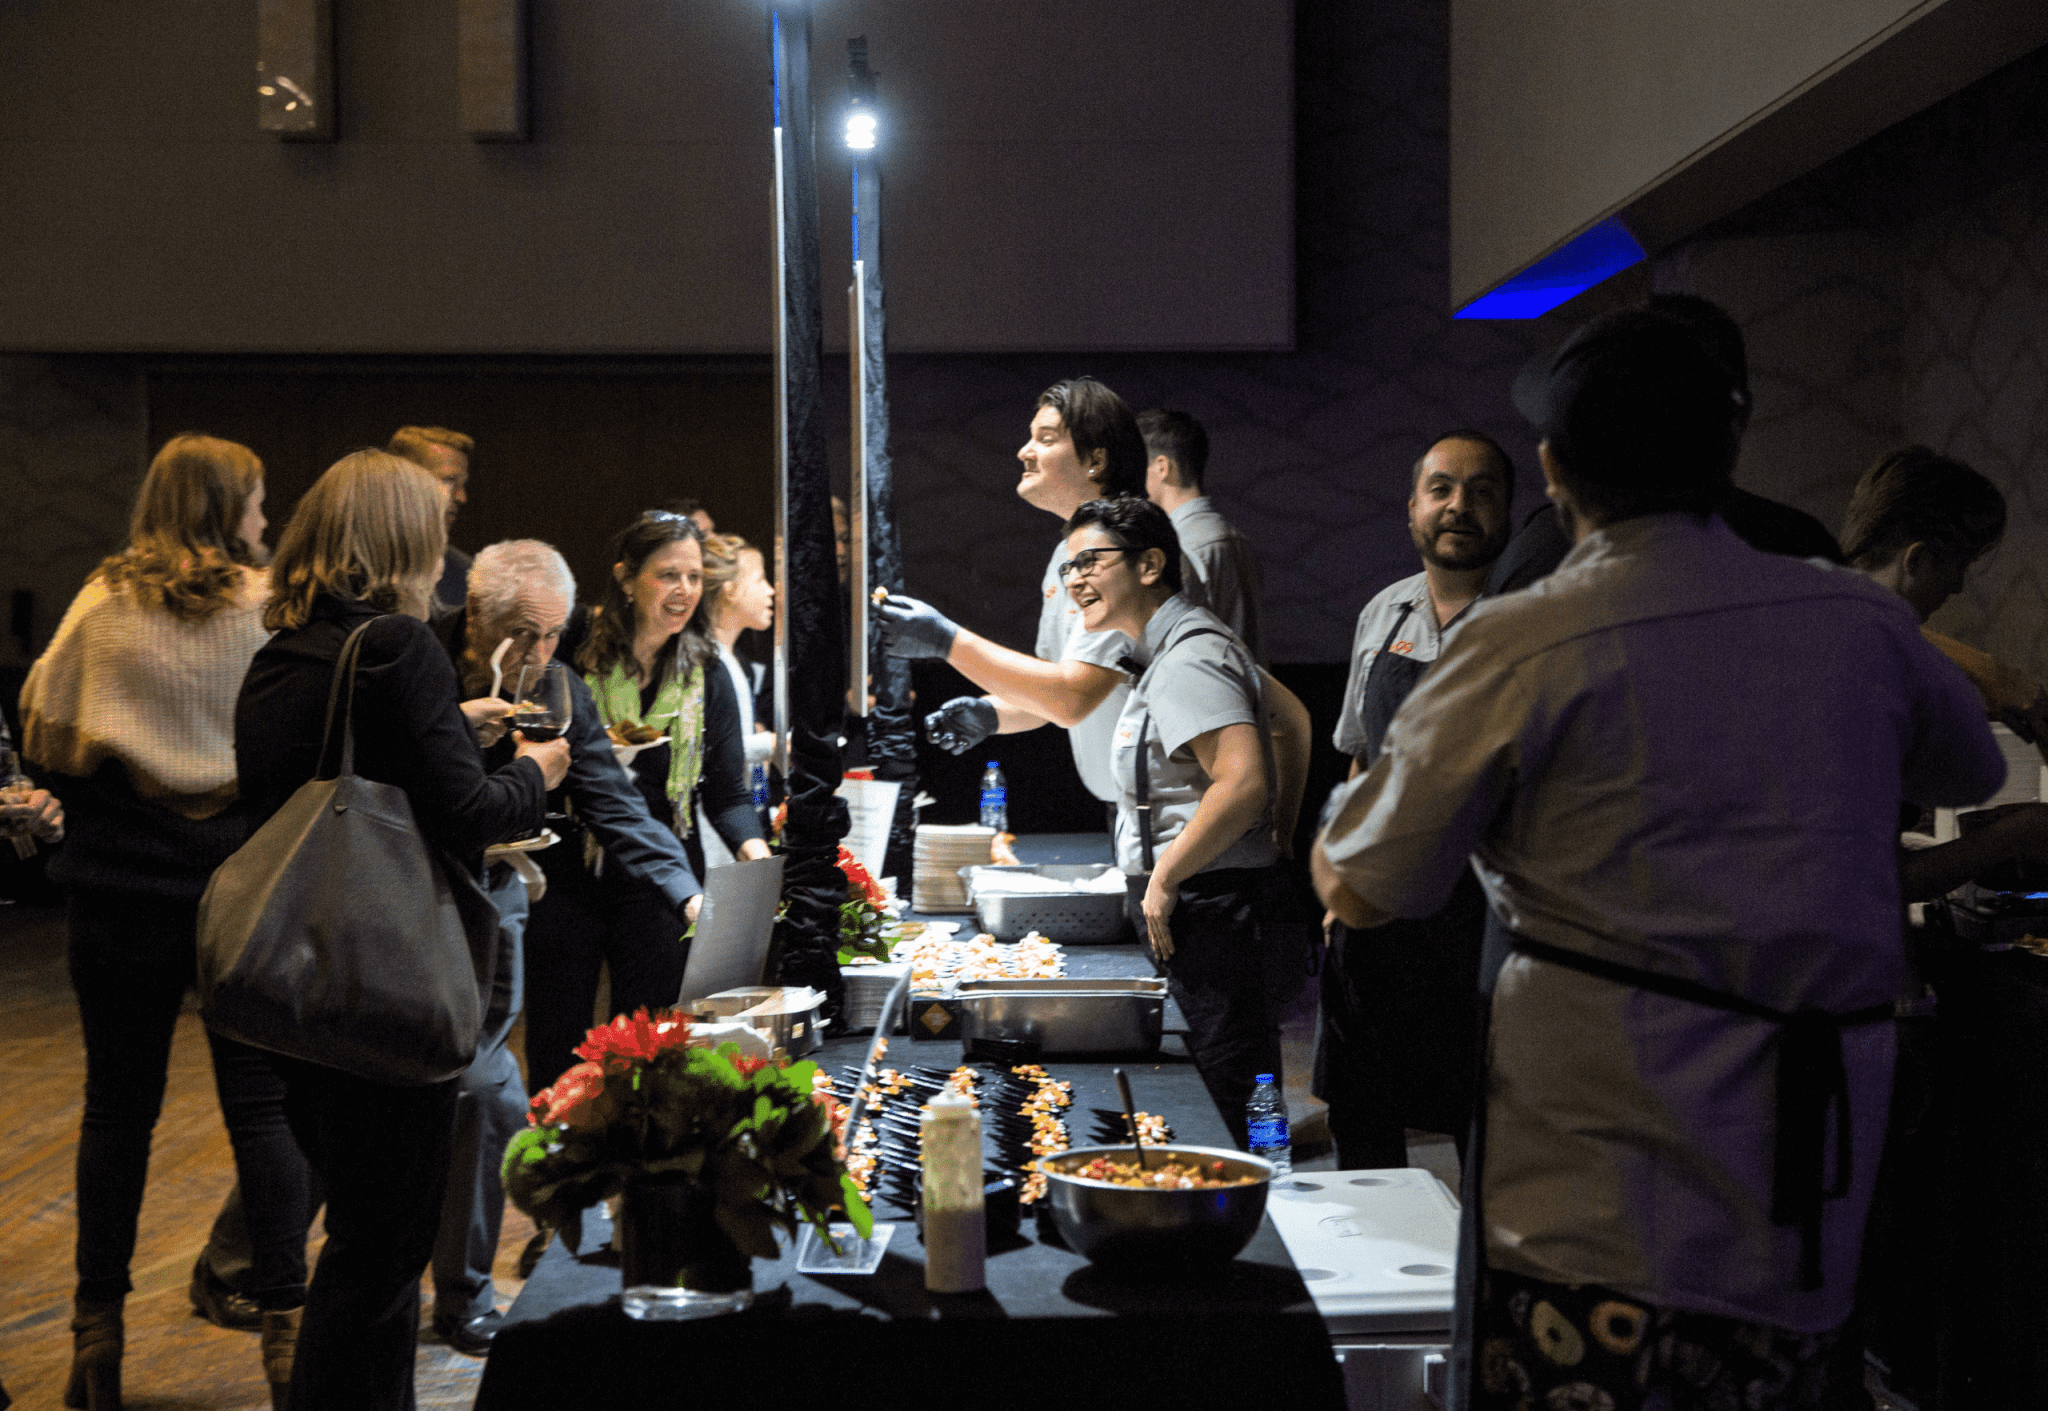 Guests sample food at A Taste for Life